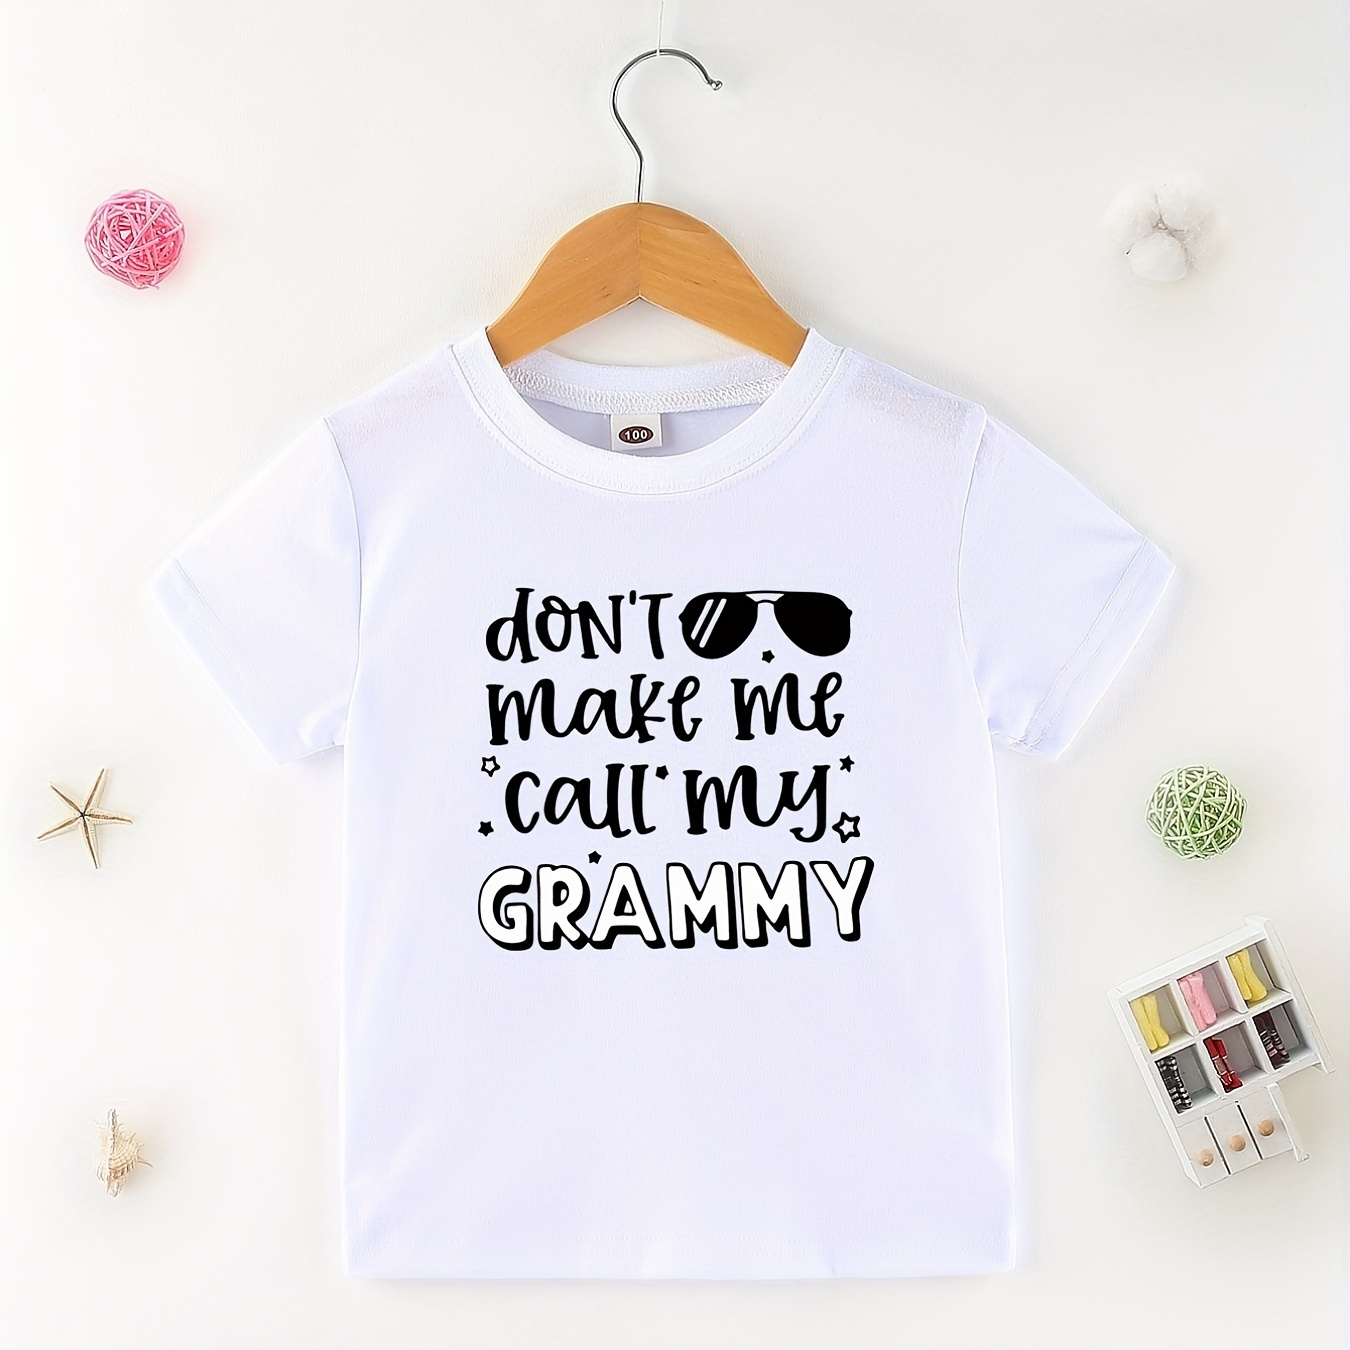 

Don't Make Me Call My Grammy Letter Print Boys Creative T-shirt, Casual Lightweight Comfy Short Sleeve Tee Tops, Kids Clothings For Summer